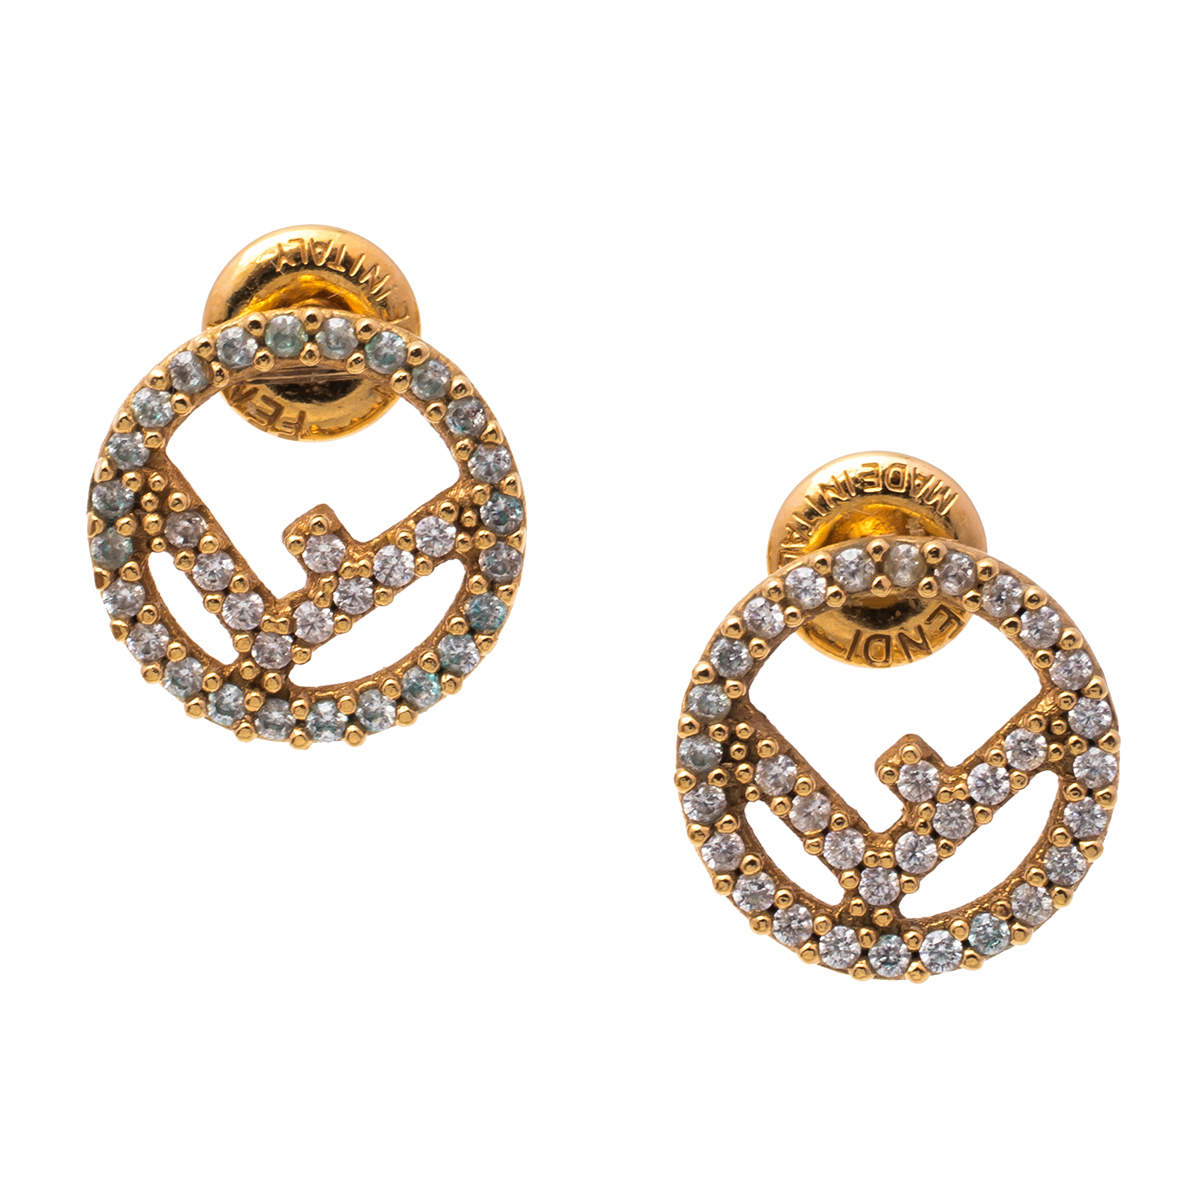 Fendi Gold Plated Poured Glass Earrings